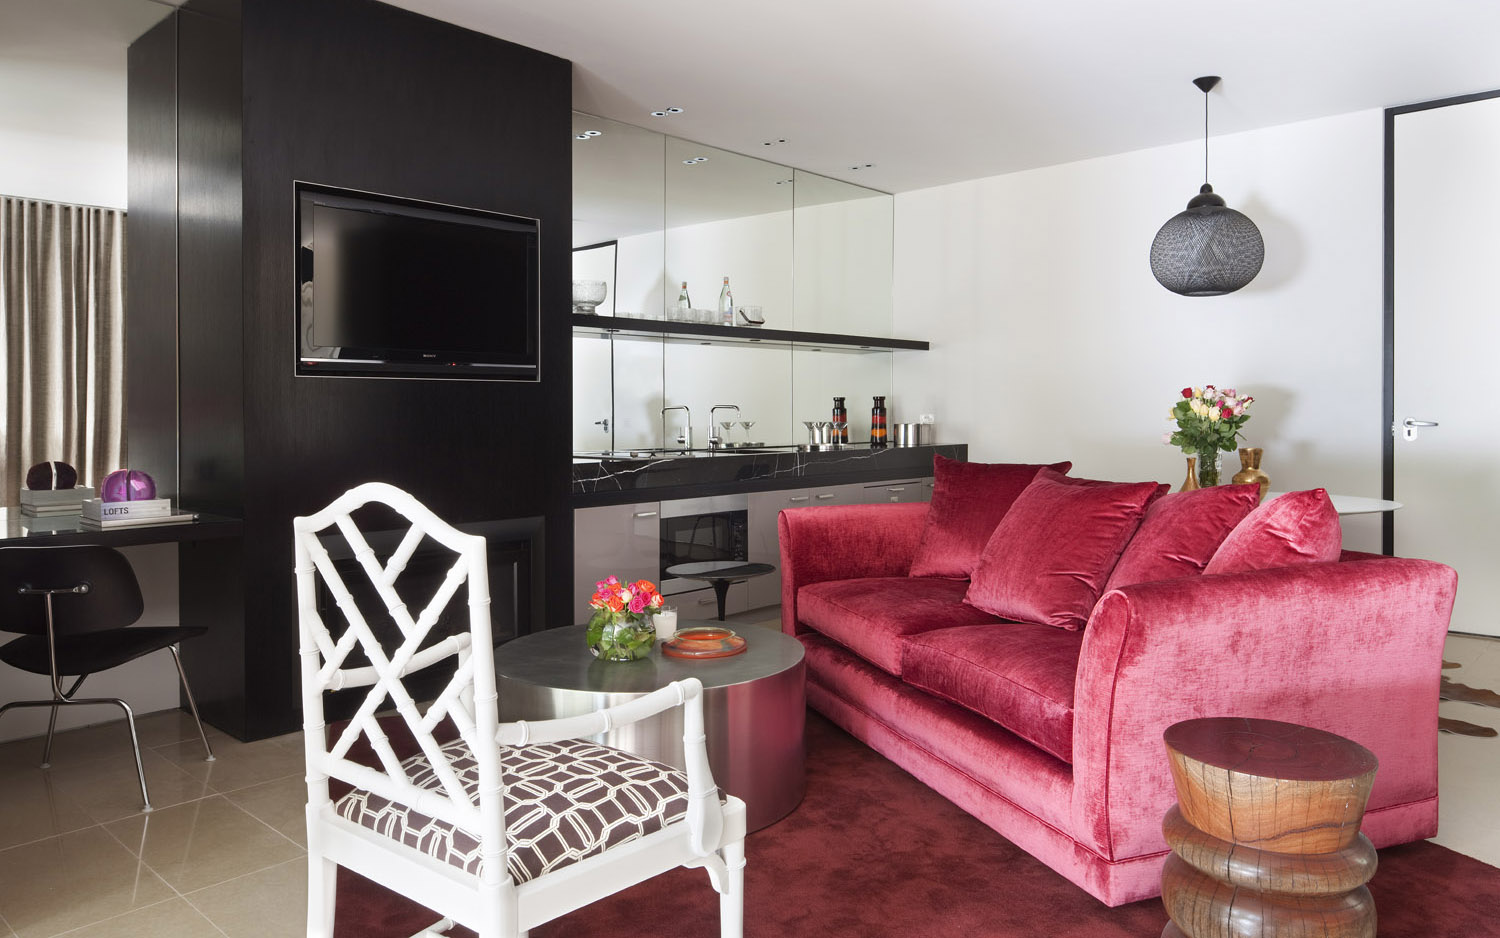 Hepburn at Hepburn - by 8Hotels - Coogee Beach Accommodation